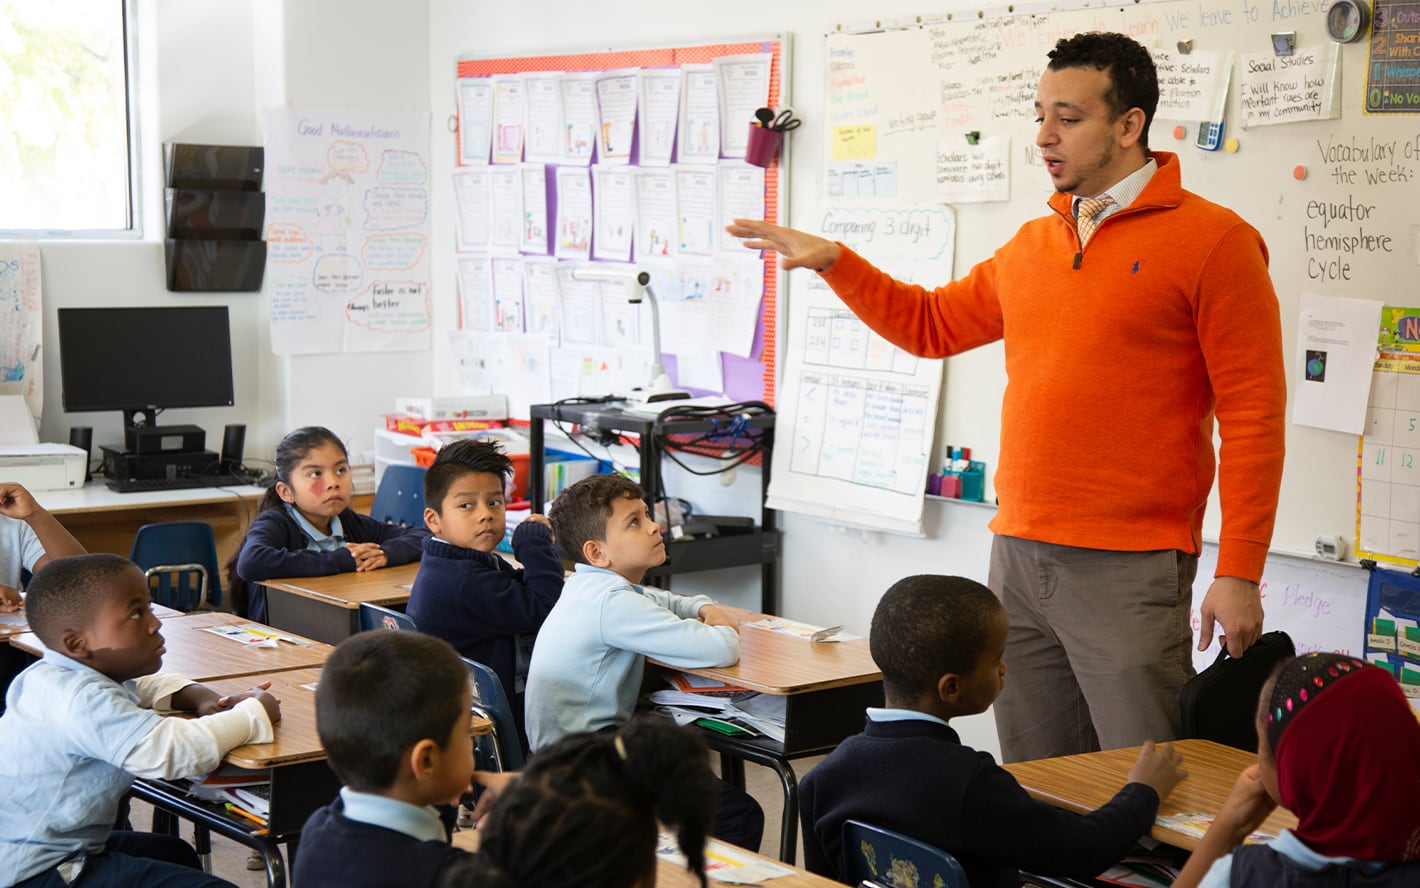 A teacher in an orange sweater gesturing while explaining a lesson to attentive elementary students in a classroom.